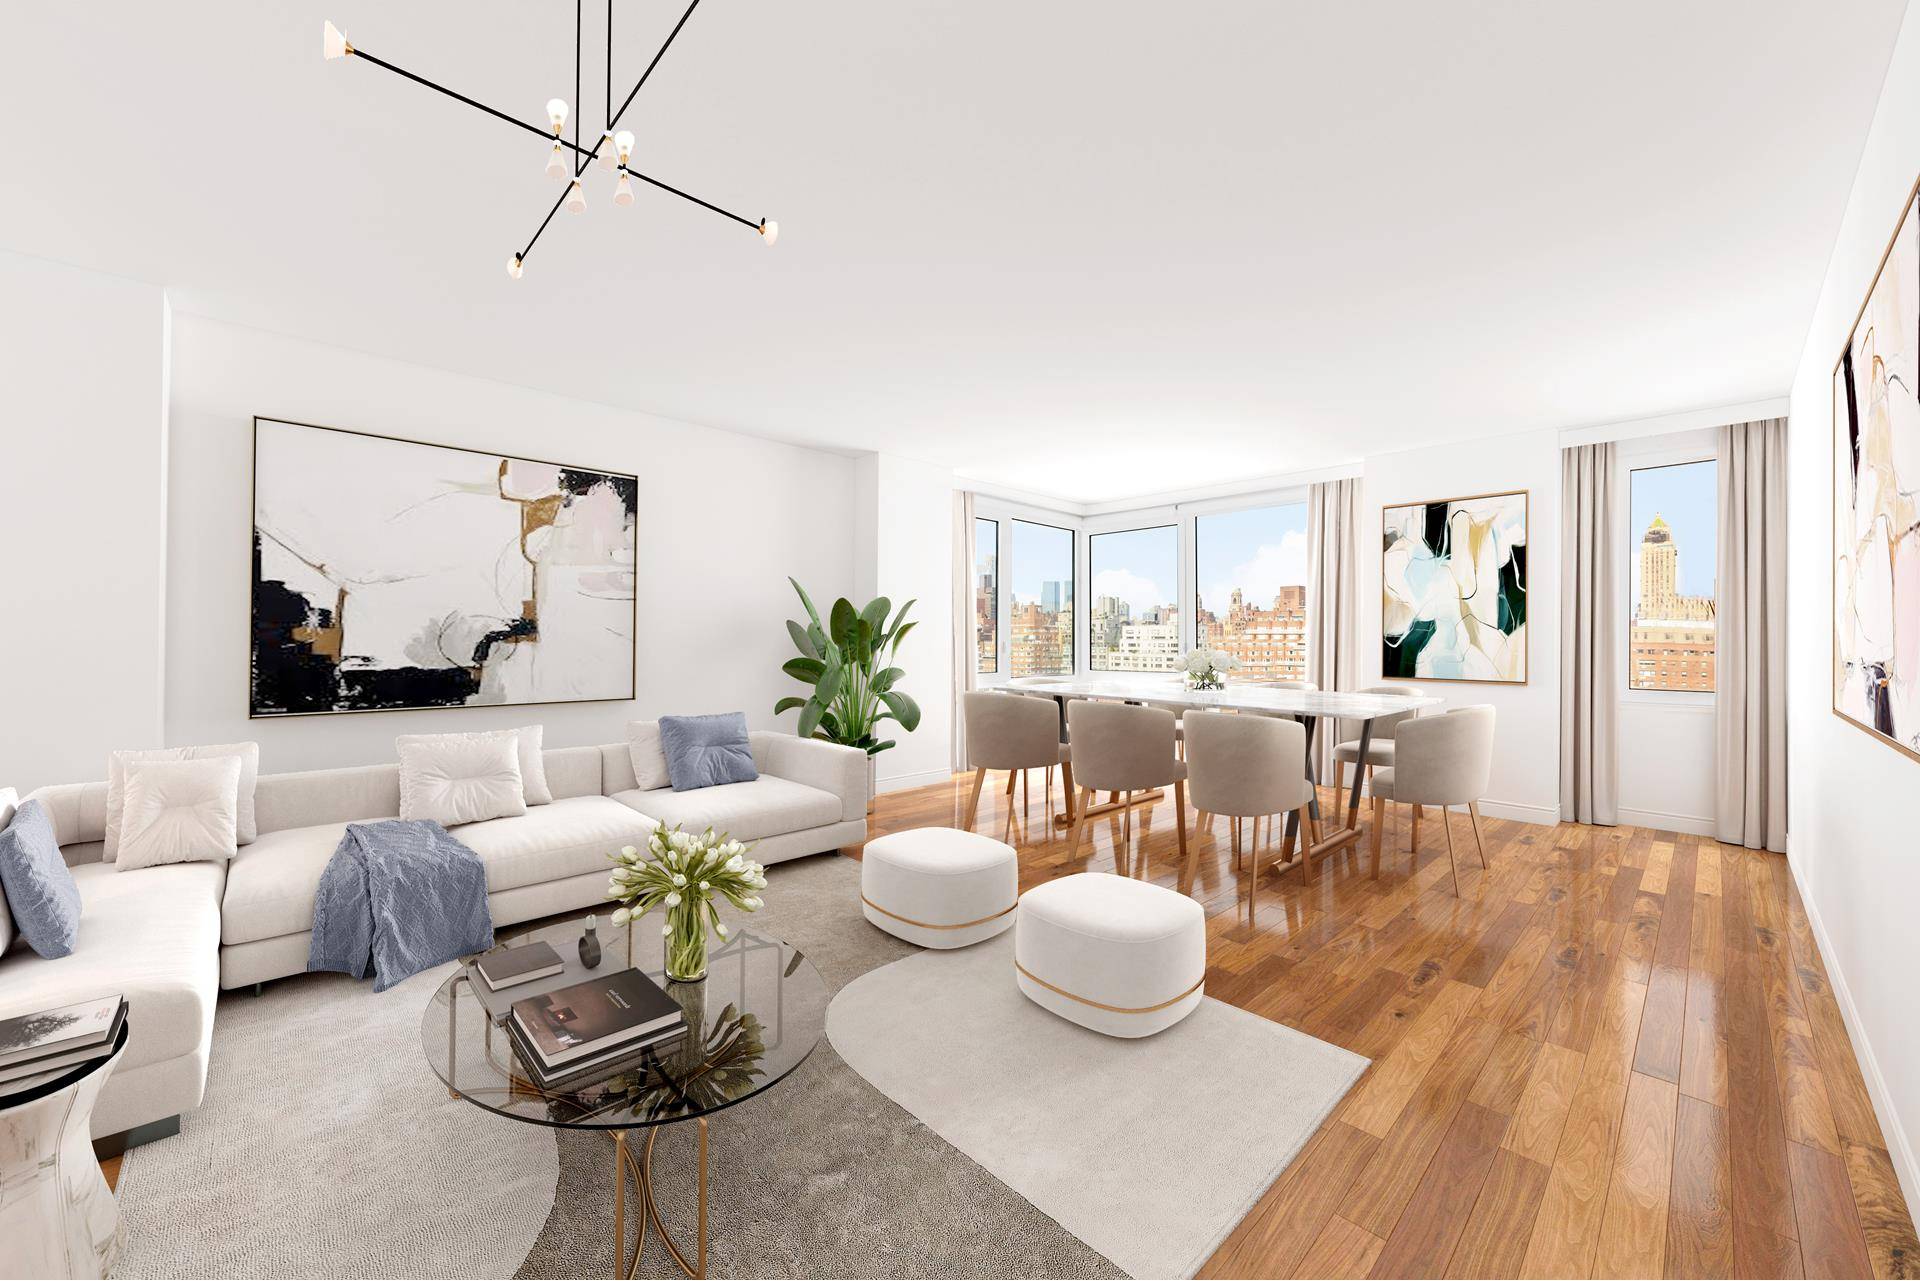 A breathtaking, bright and elegant home awaits you at The Seville Condominium.